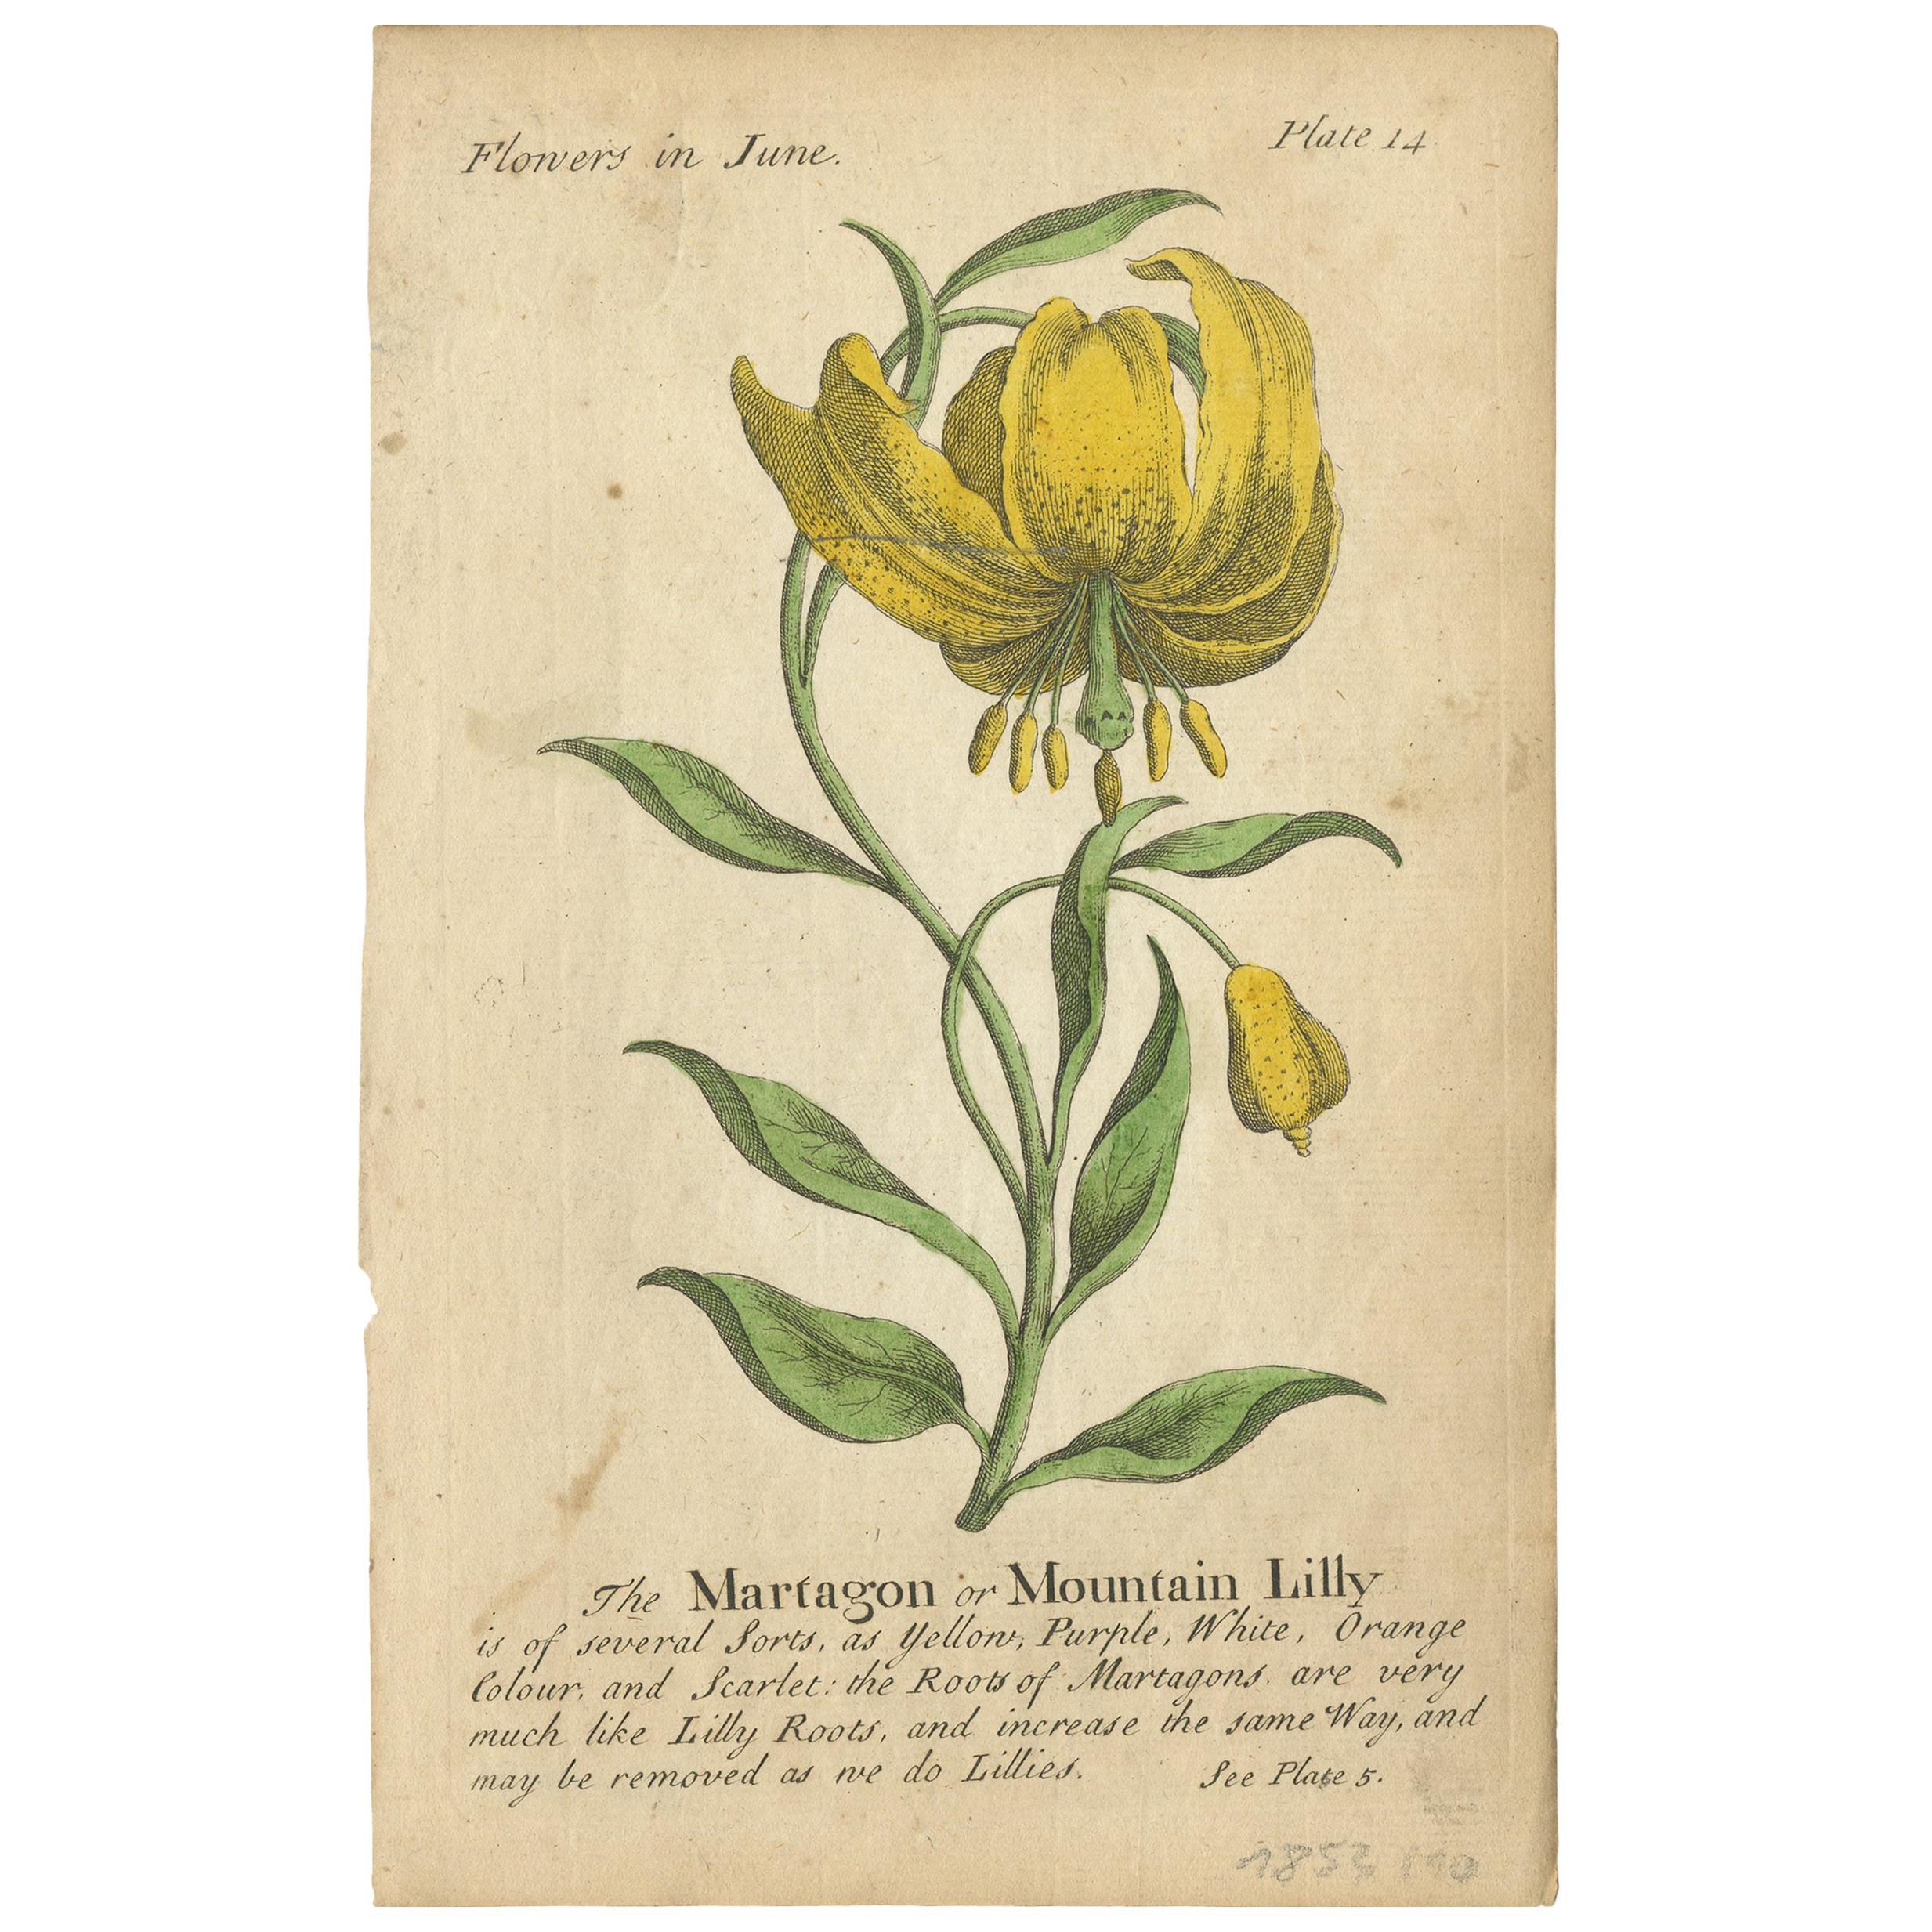 Antique flower print titled 'The Martagon or Mountain Lilly' and 'Rosa Mundi'. These prints originate from 'The Compleat Florist' by J. Duke.